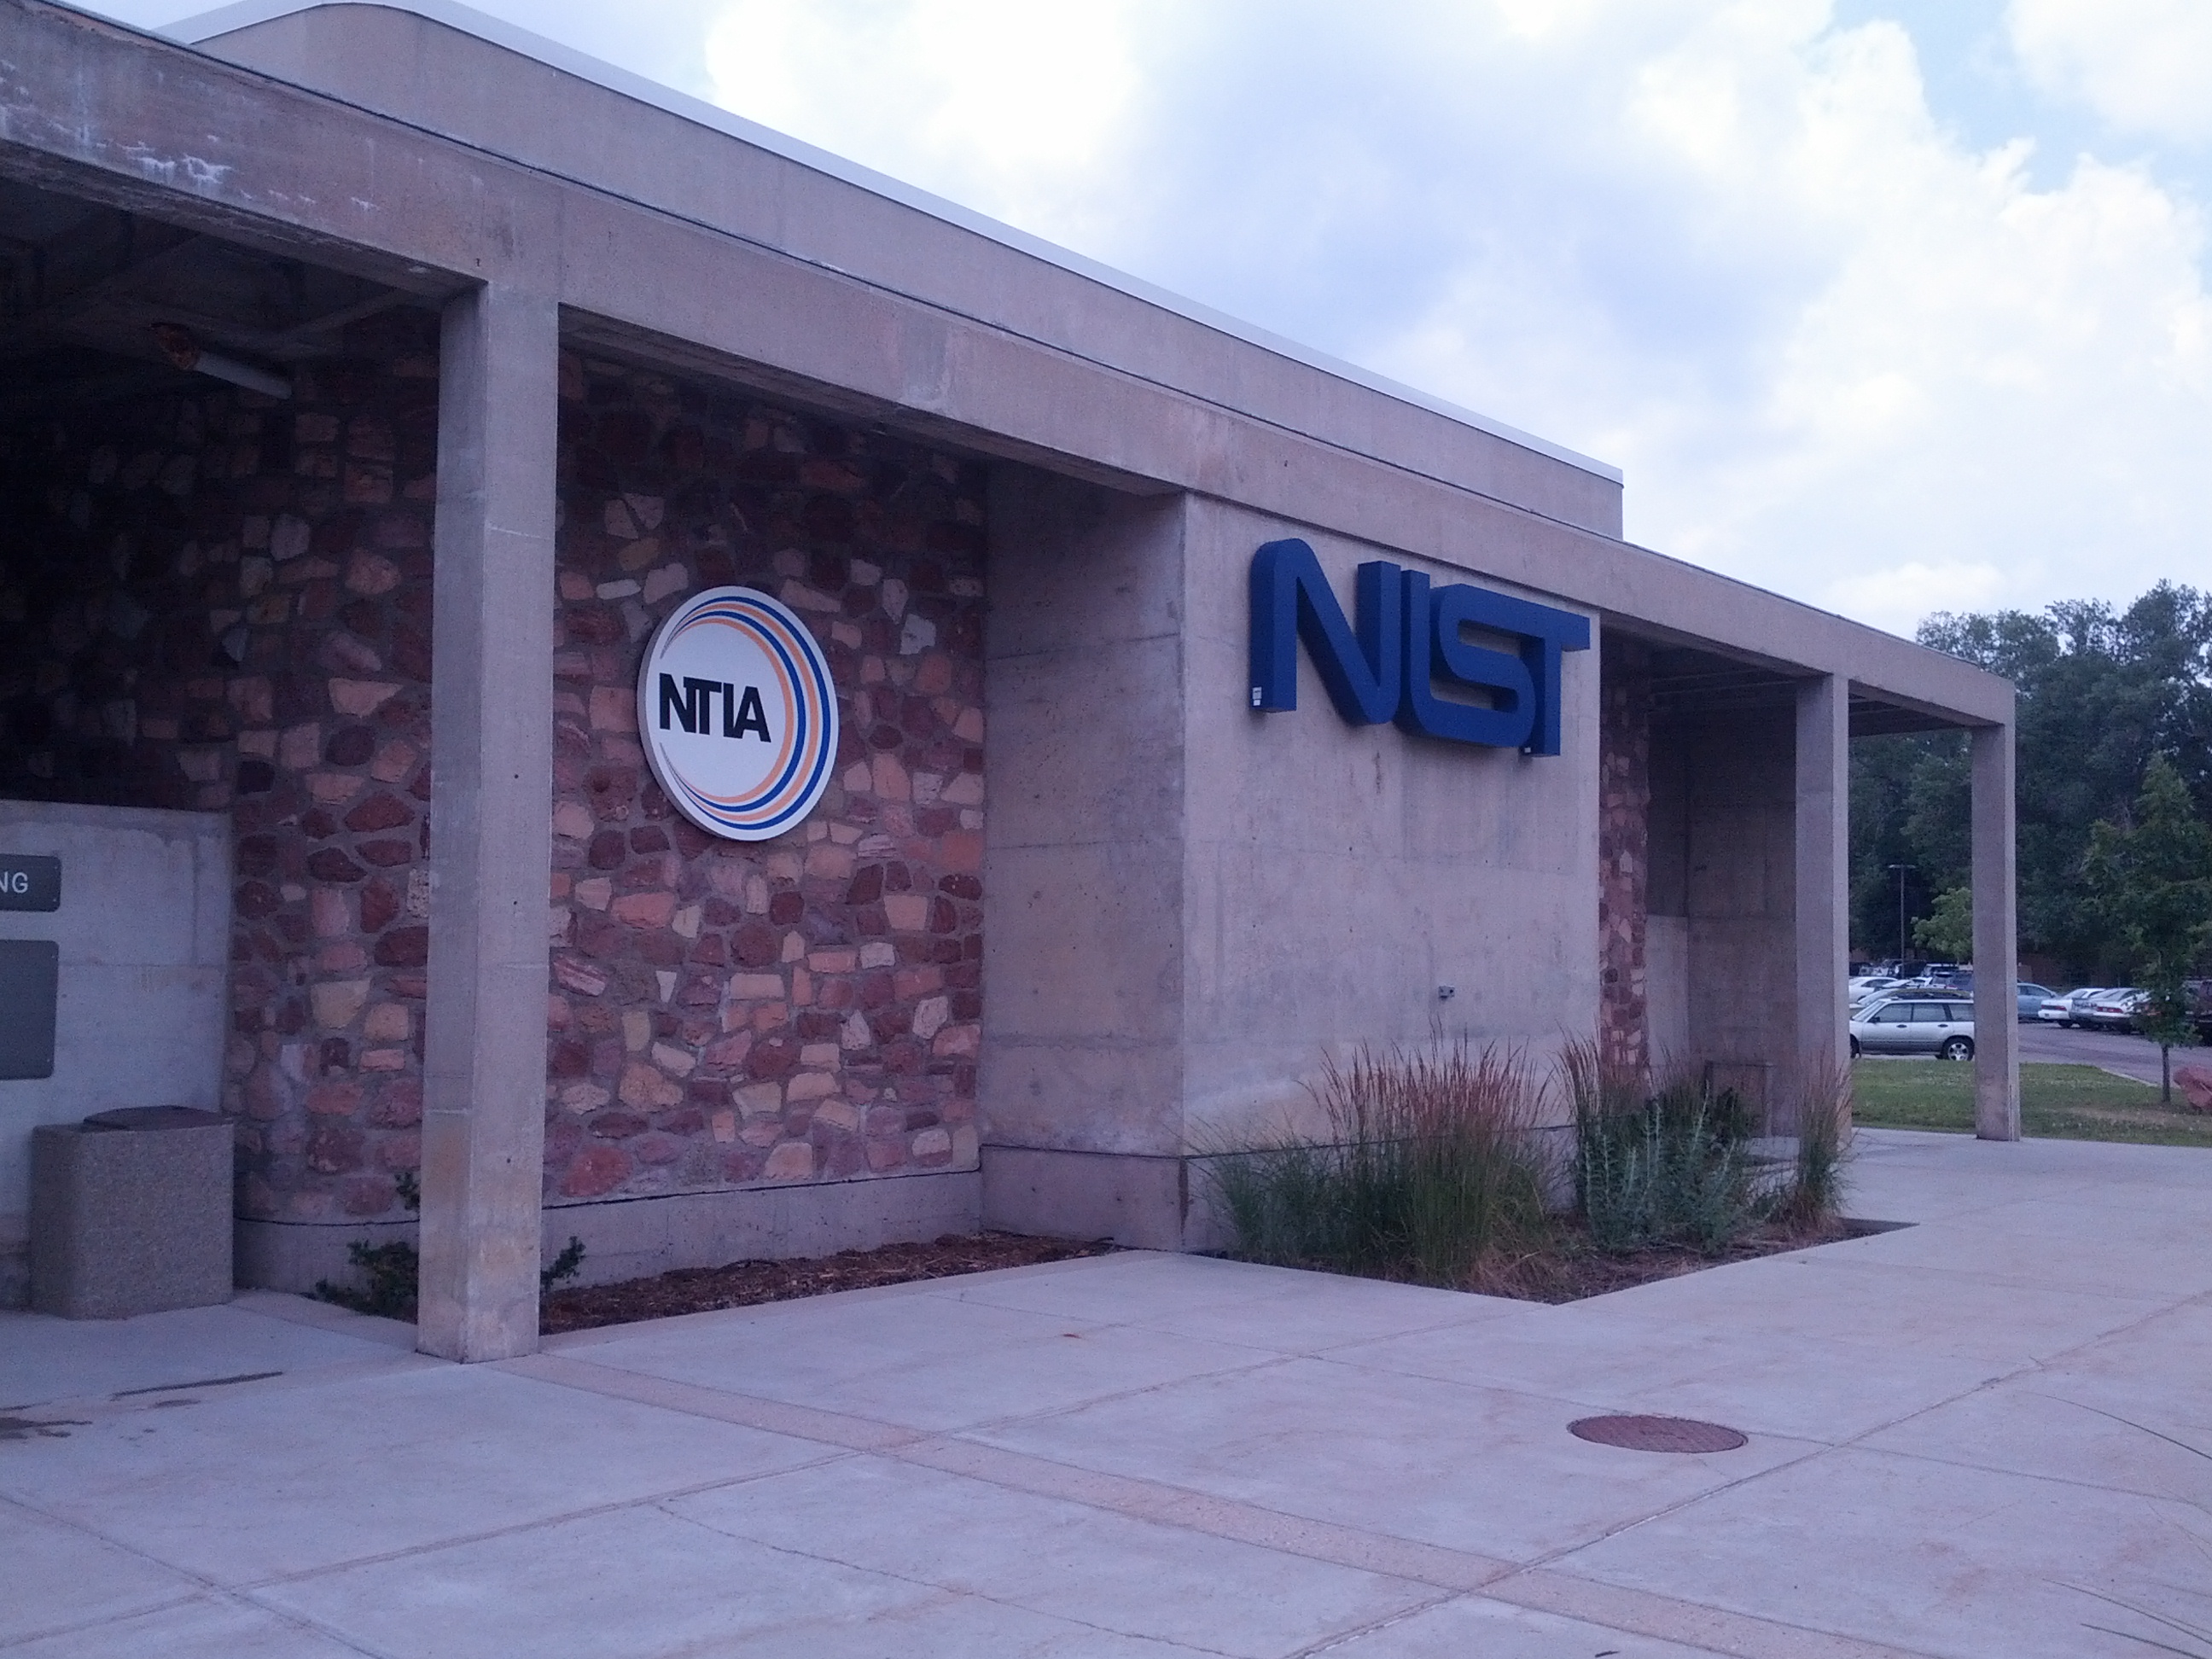 NIST Headquarters. Photo by Dr. Attariwala